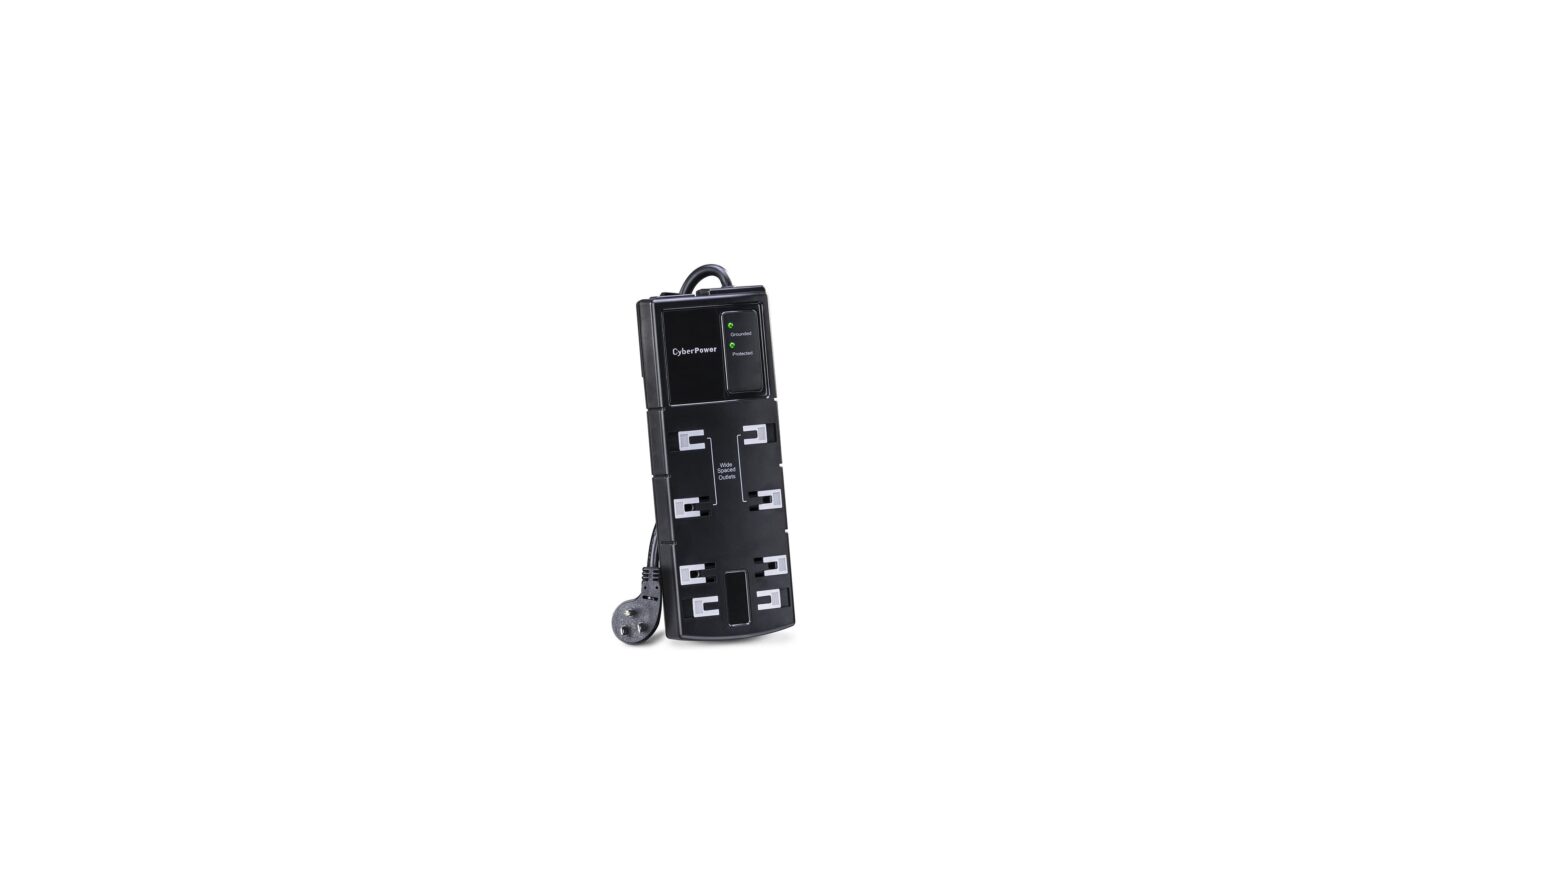 Cyber Power CSB808 Essential Surge Protector featured